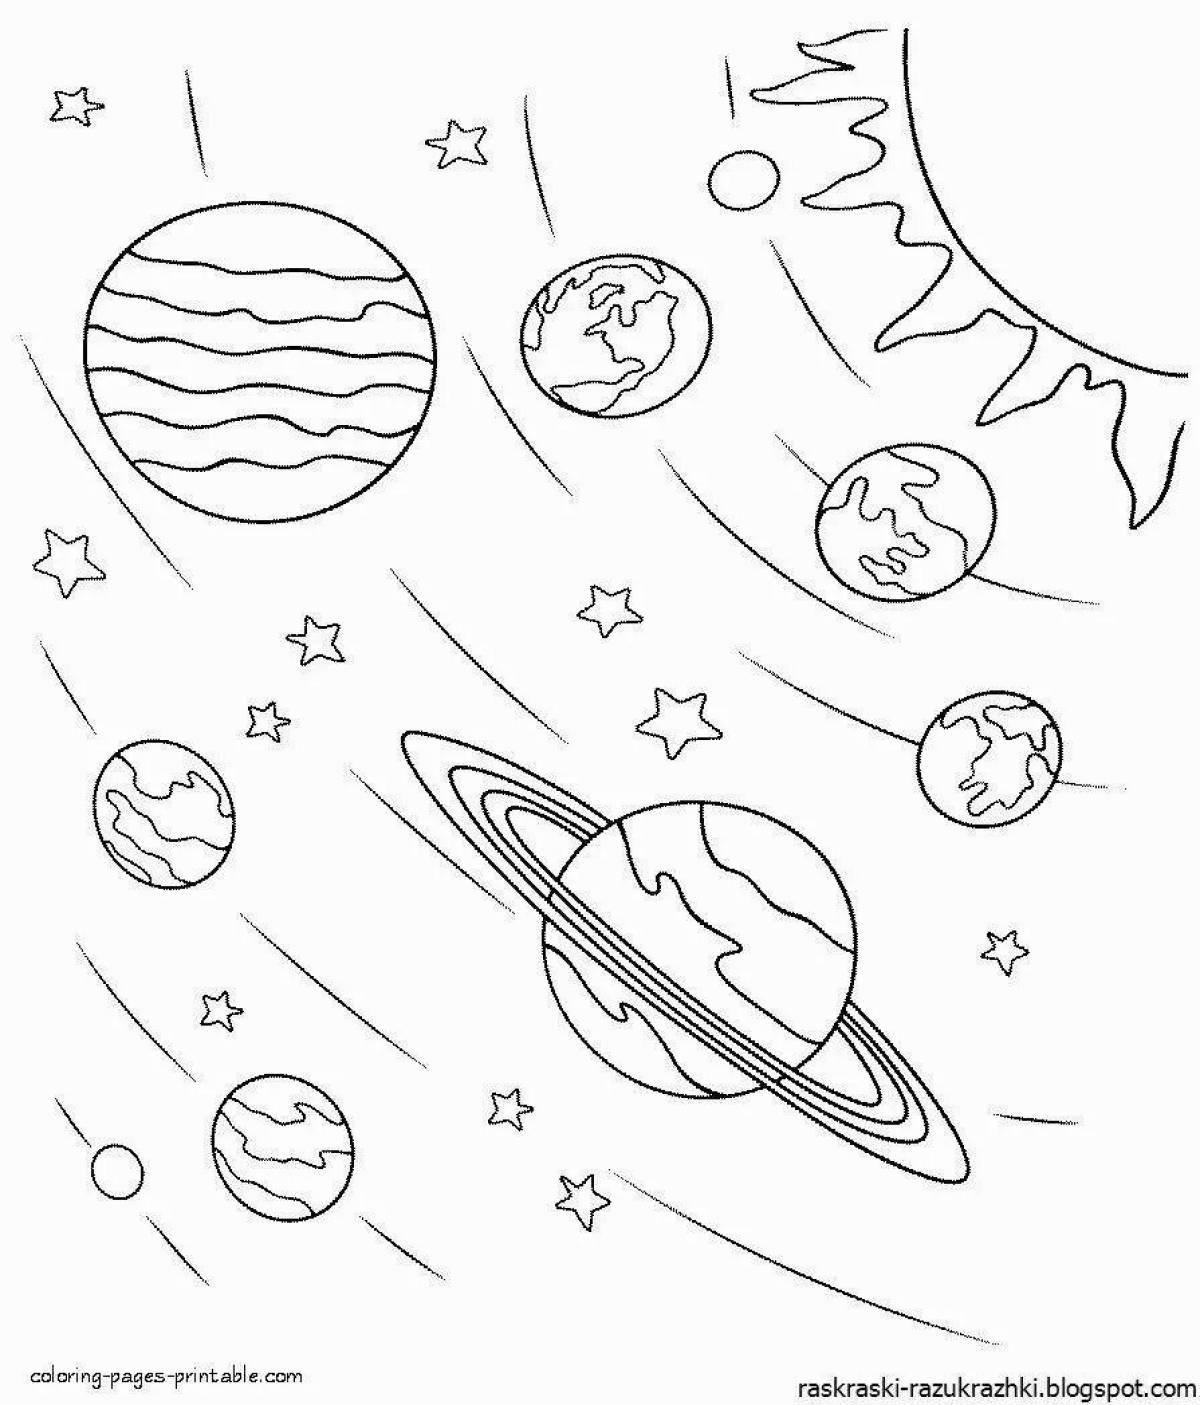 Playful space and planets coloring page for kids